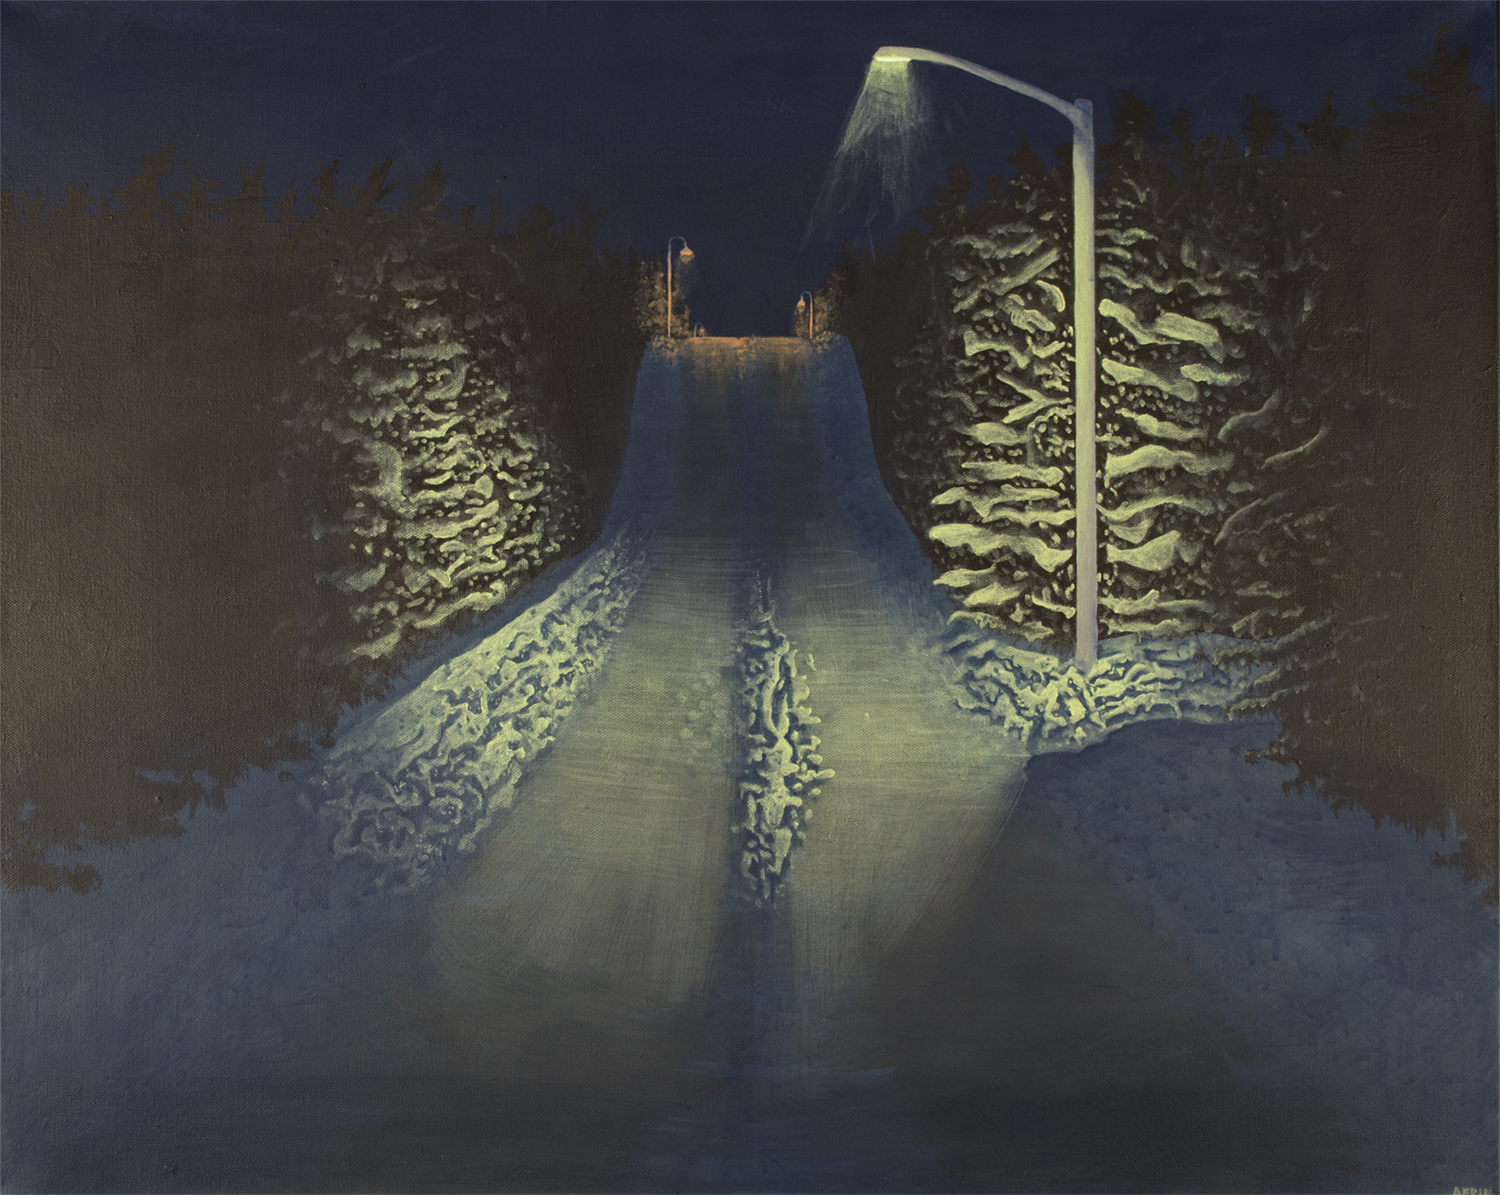 a street light shines on a desolate snowy road surrounded by trees, courtesy of the artist